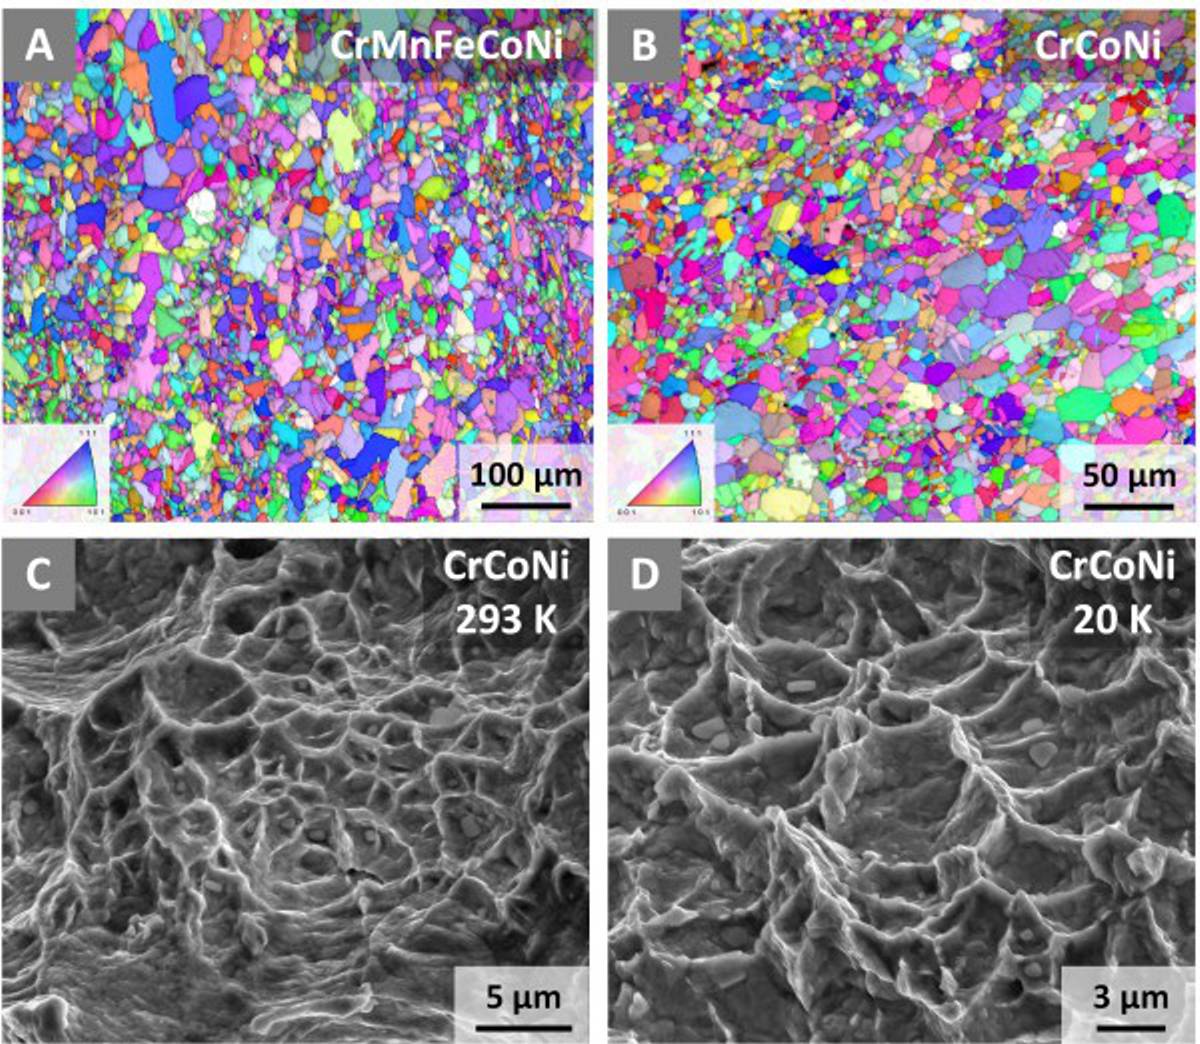 Credit: Robert Ritchie/Berkeley Lab These images, generated from scanning electron microscopy, show the grain structures and crystal lattice orientations of (A) CrMnFeCoNi and (B) CrCoNi alloys. (C) and (D) show examples of fractures in CrCoNi at 293 K and 20 K, respectively.